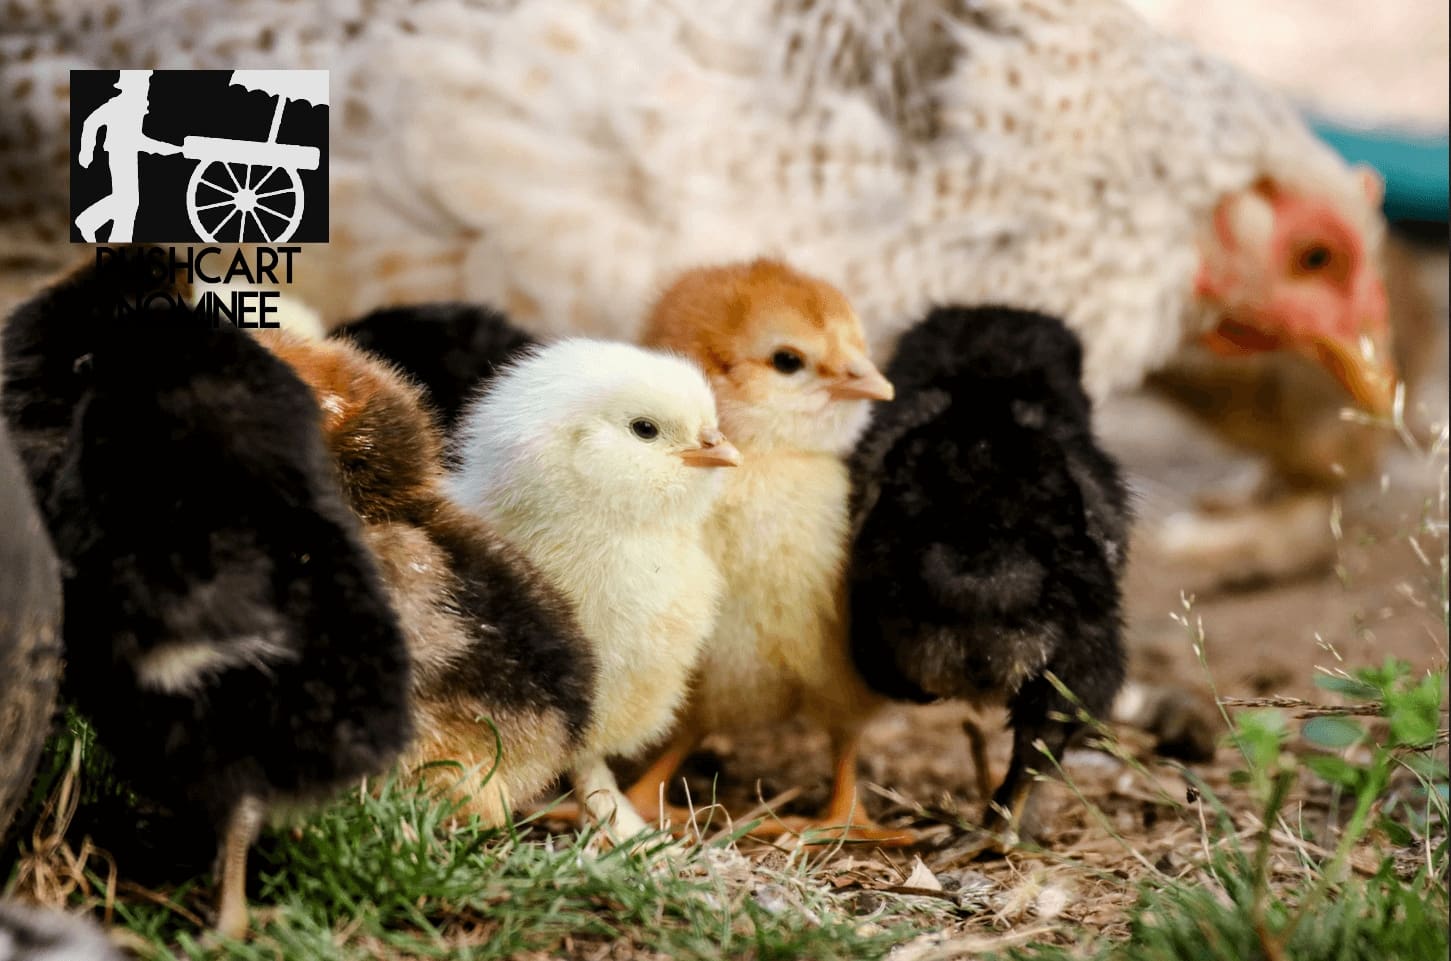 Photo of baby chicks by Michael Anfang for Unsplash